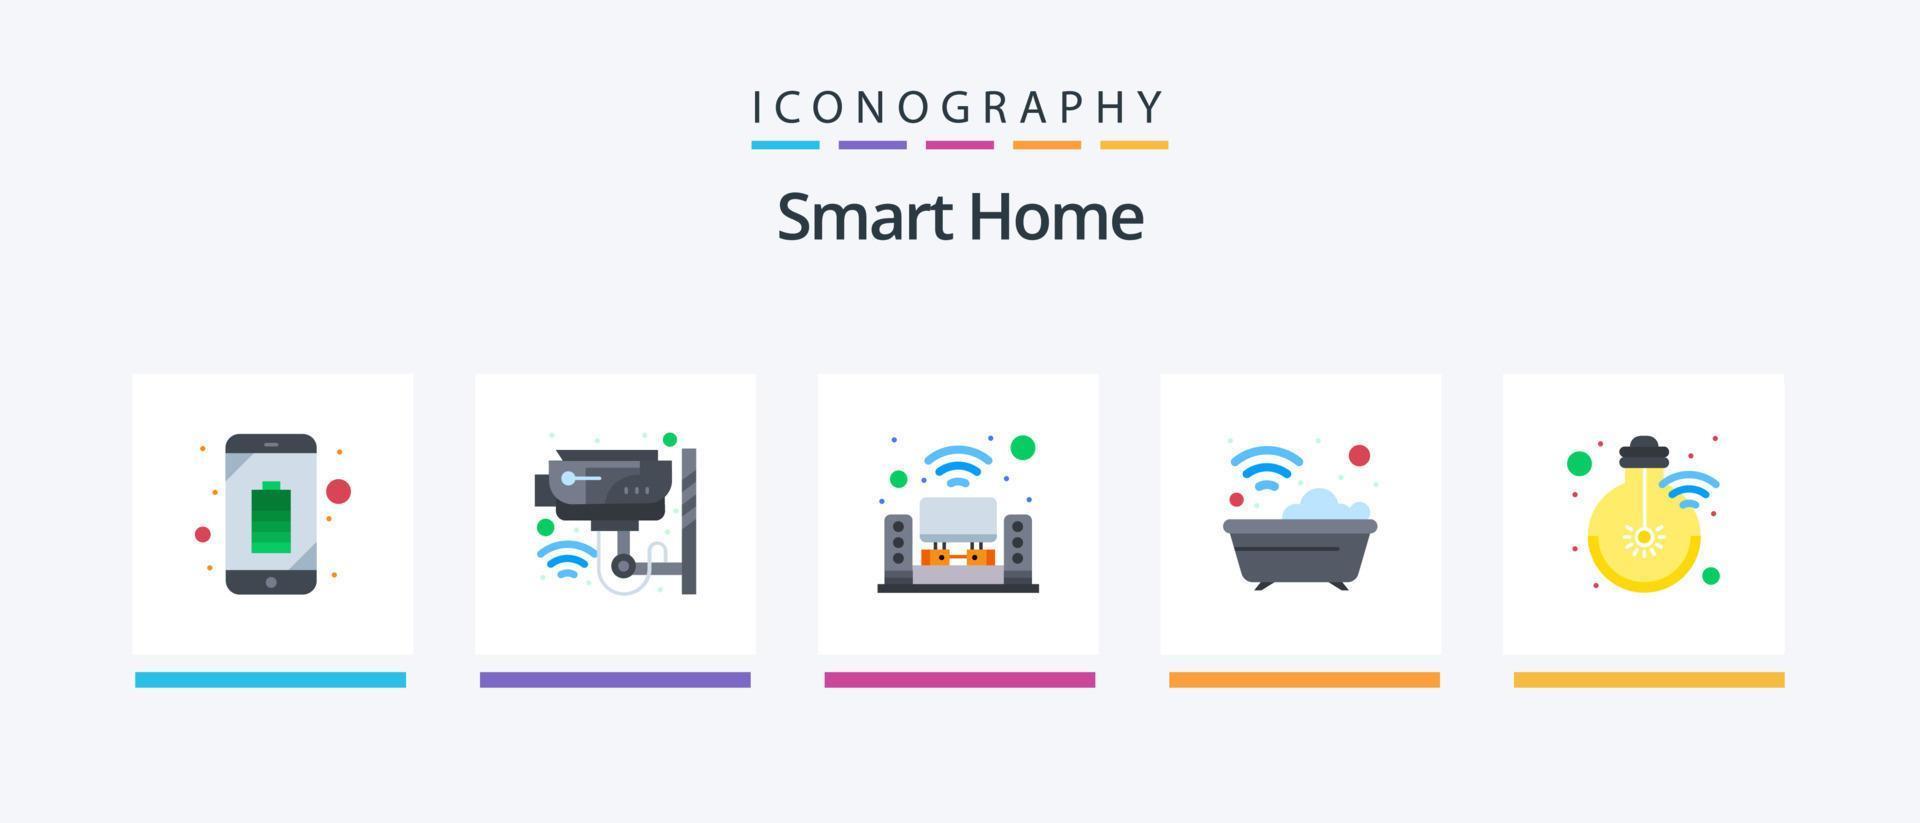 Smart Home Flat 5 Icon Pack Including washroom. smart. surveillance. house. music system. Creative Icons Design vector